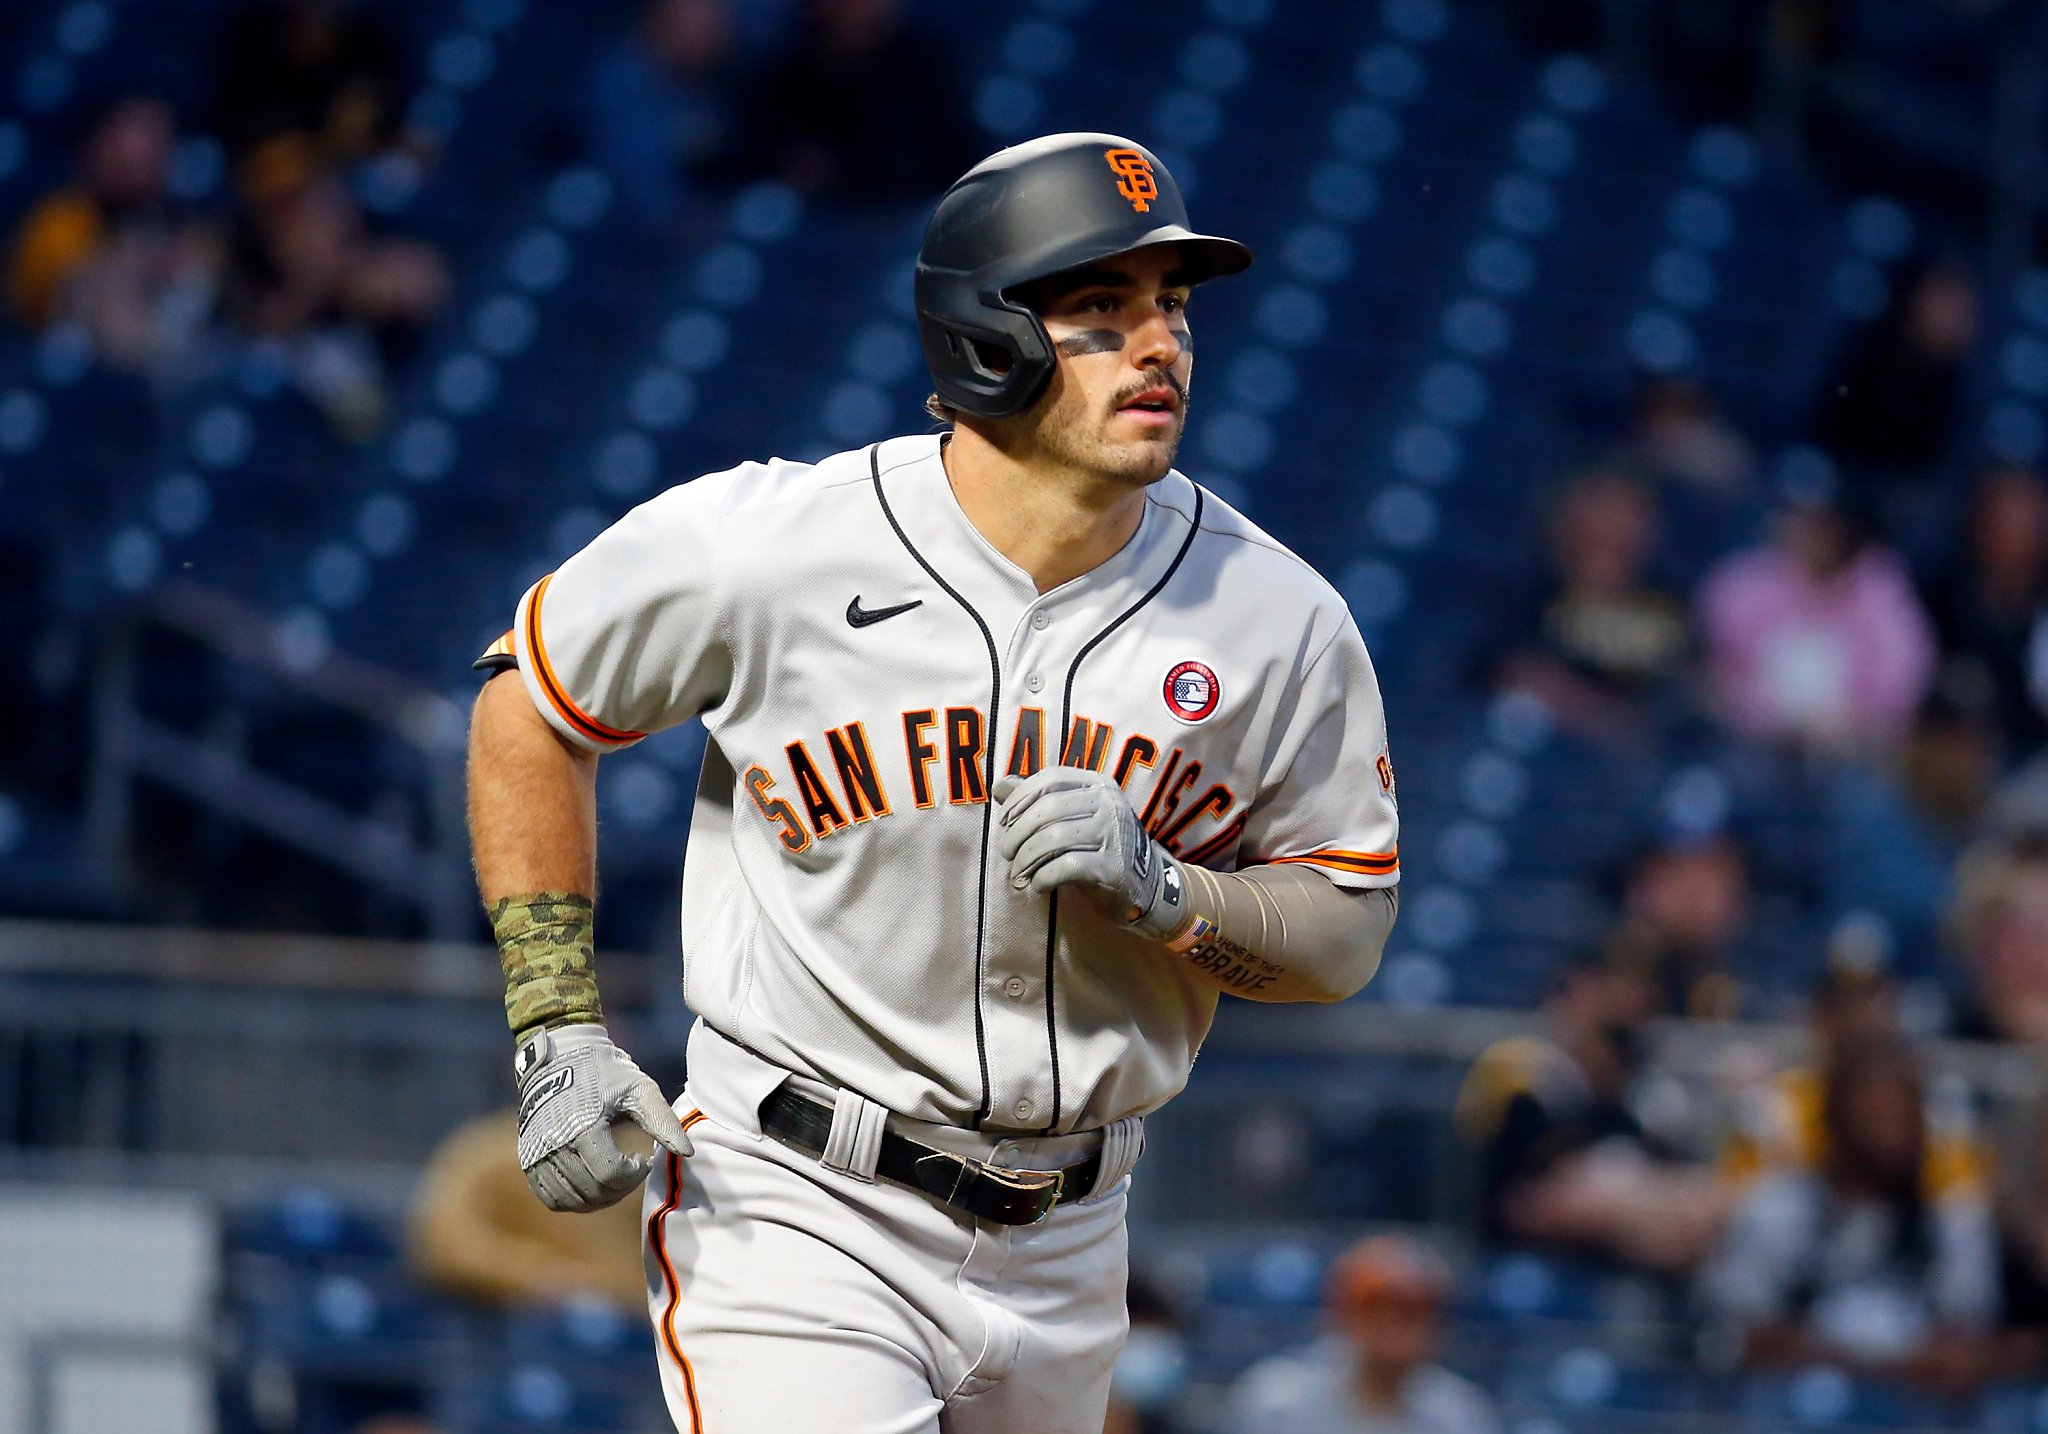 Giants' Mike Tauchman knows big rivalries, thrived against Red Sox